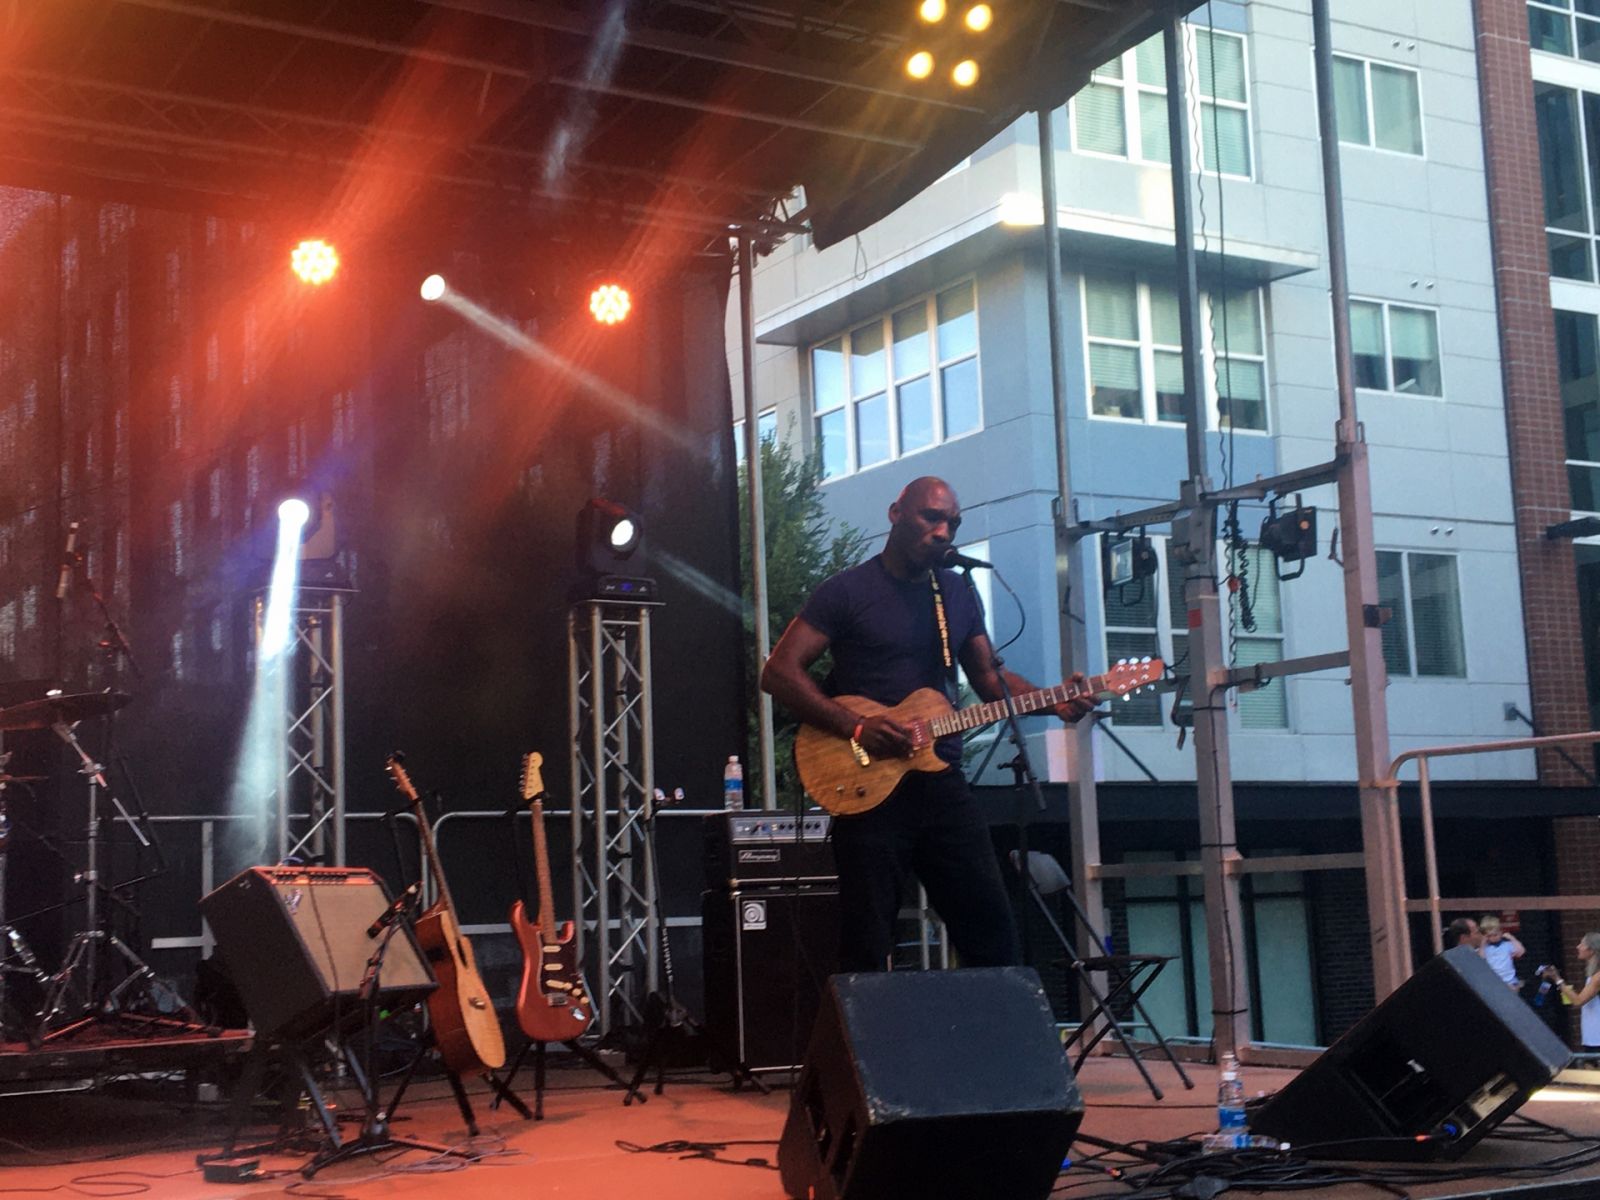 Blues singer Cedric Burnside was one of the festival's headlining acts. (Photo/Molly Hulsey)